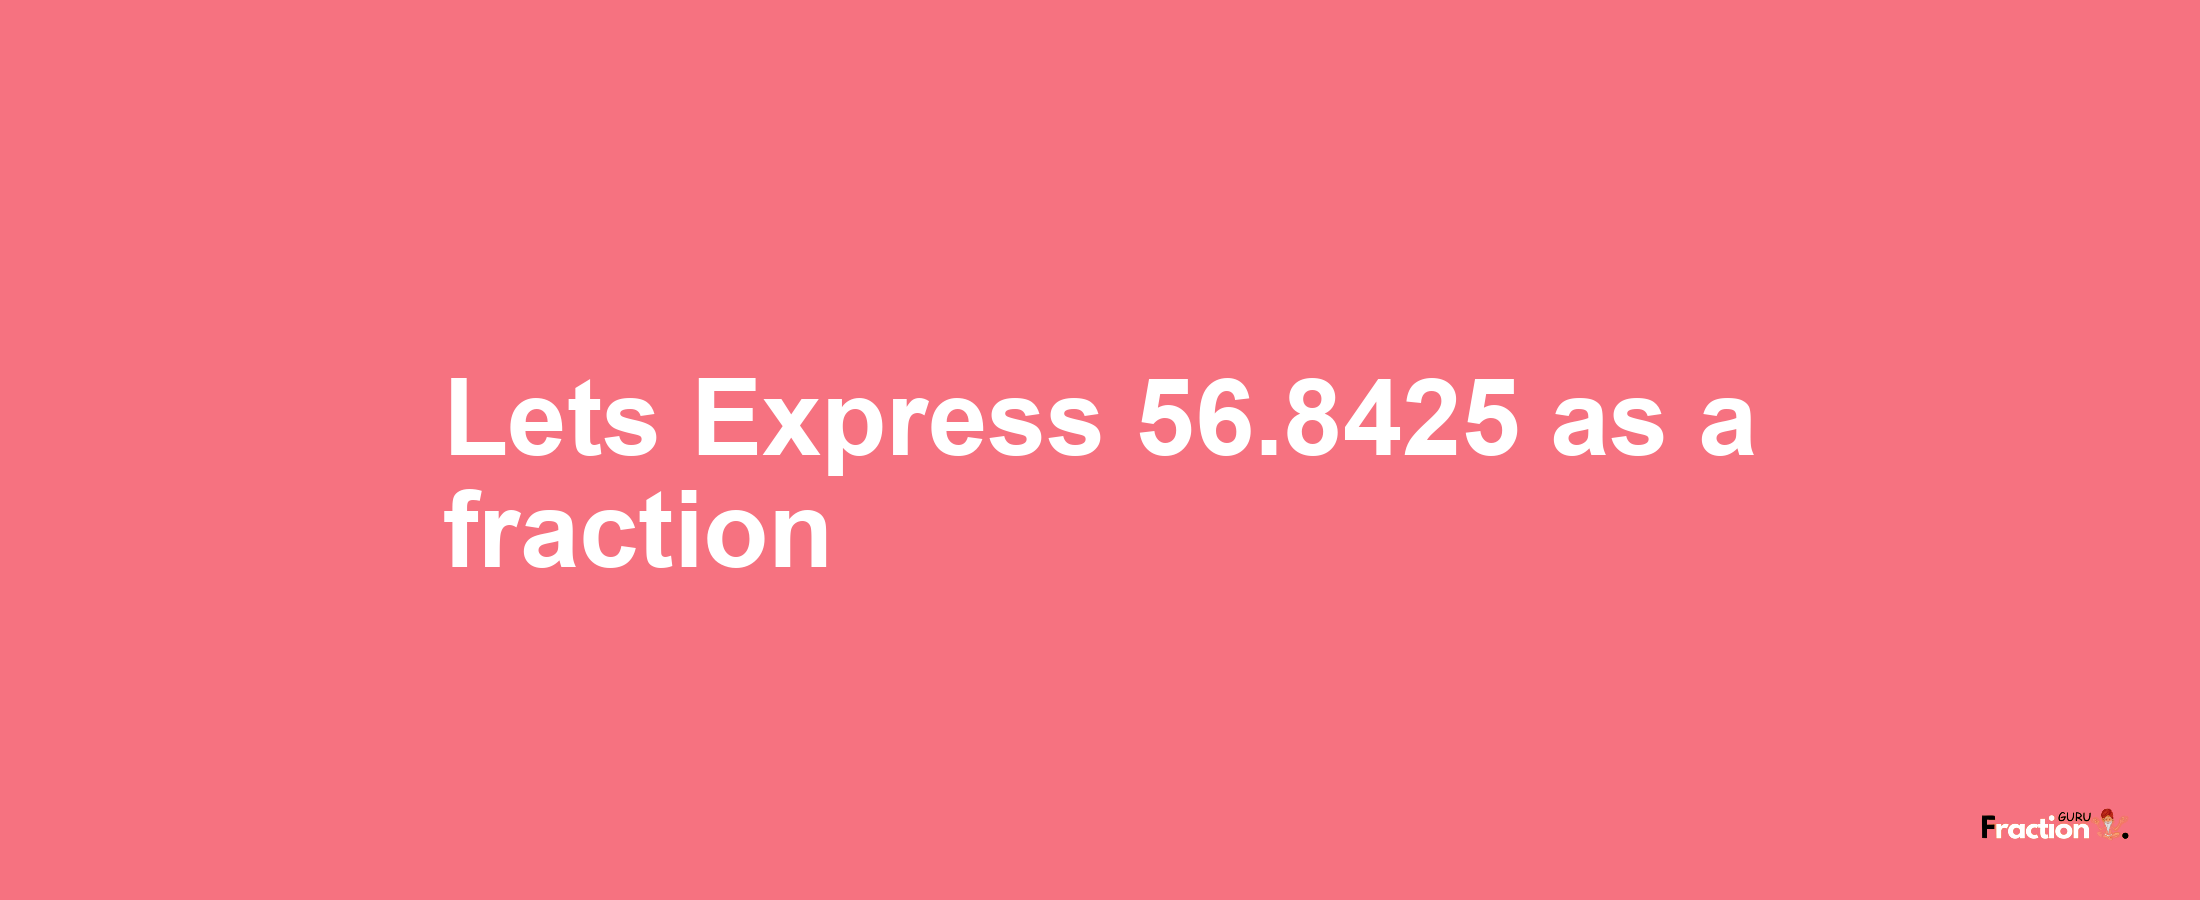 Lets Express 56.8425 as afraction